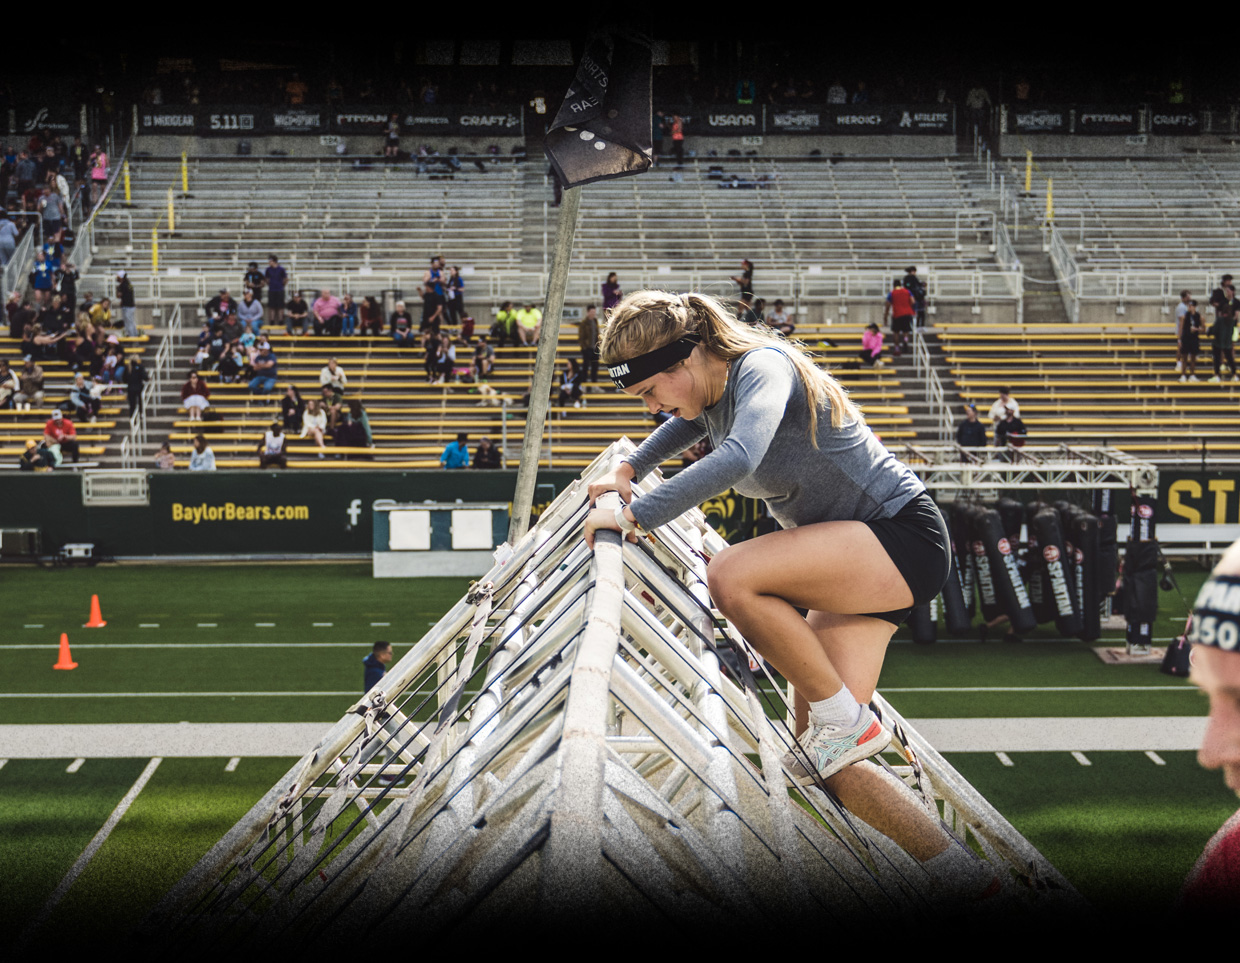 Spartan Stadion: The Epic Stadium Obstacle Course Race